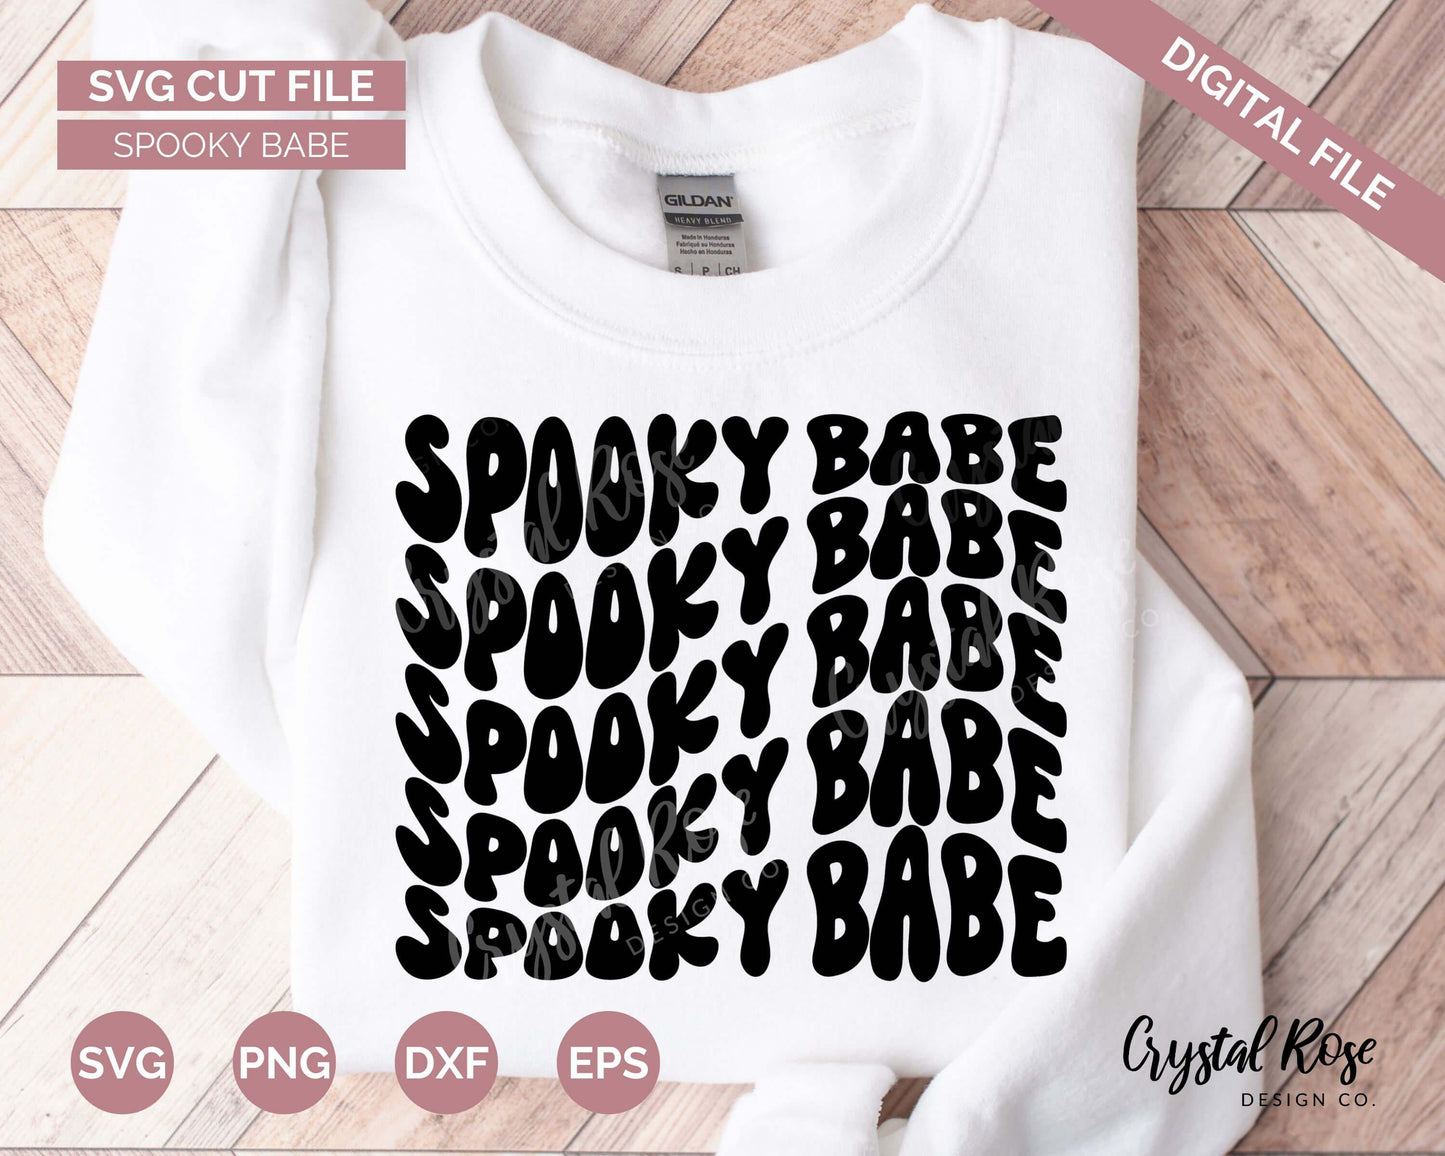 Spooky Babe SVG, Halloween SVG, Digital Download, Cricut, Silhouette, Glowforge (includes svg/png/dxf/eps)